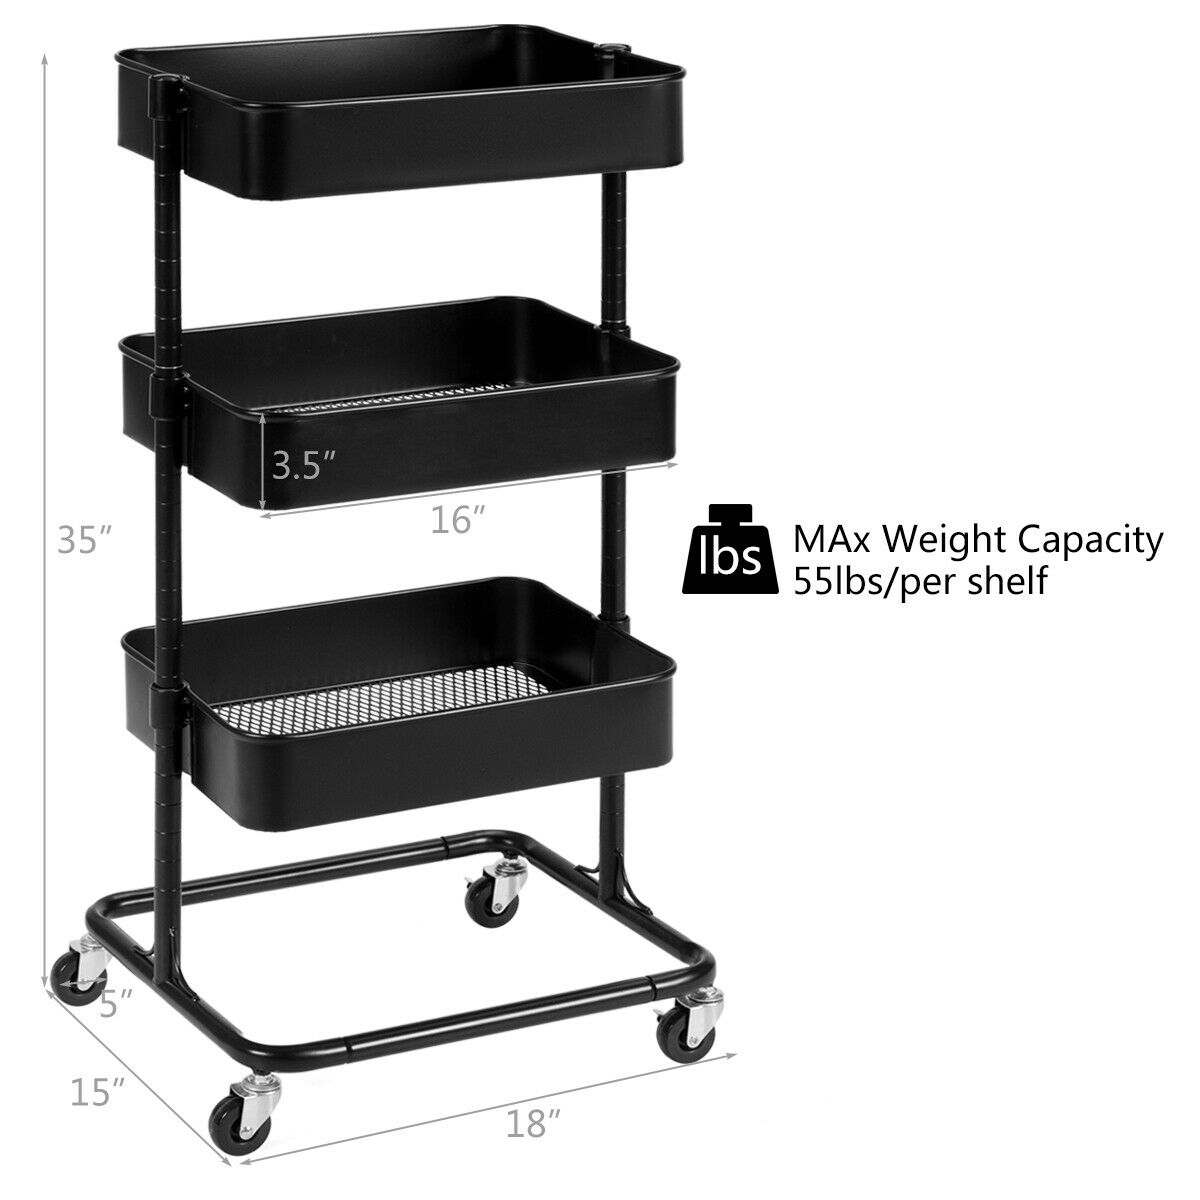 3 Tray Service Cart Rolling Storage Tool Cart with Plastic Tray Aluminum Tube 